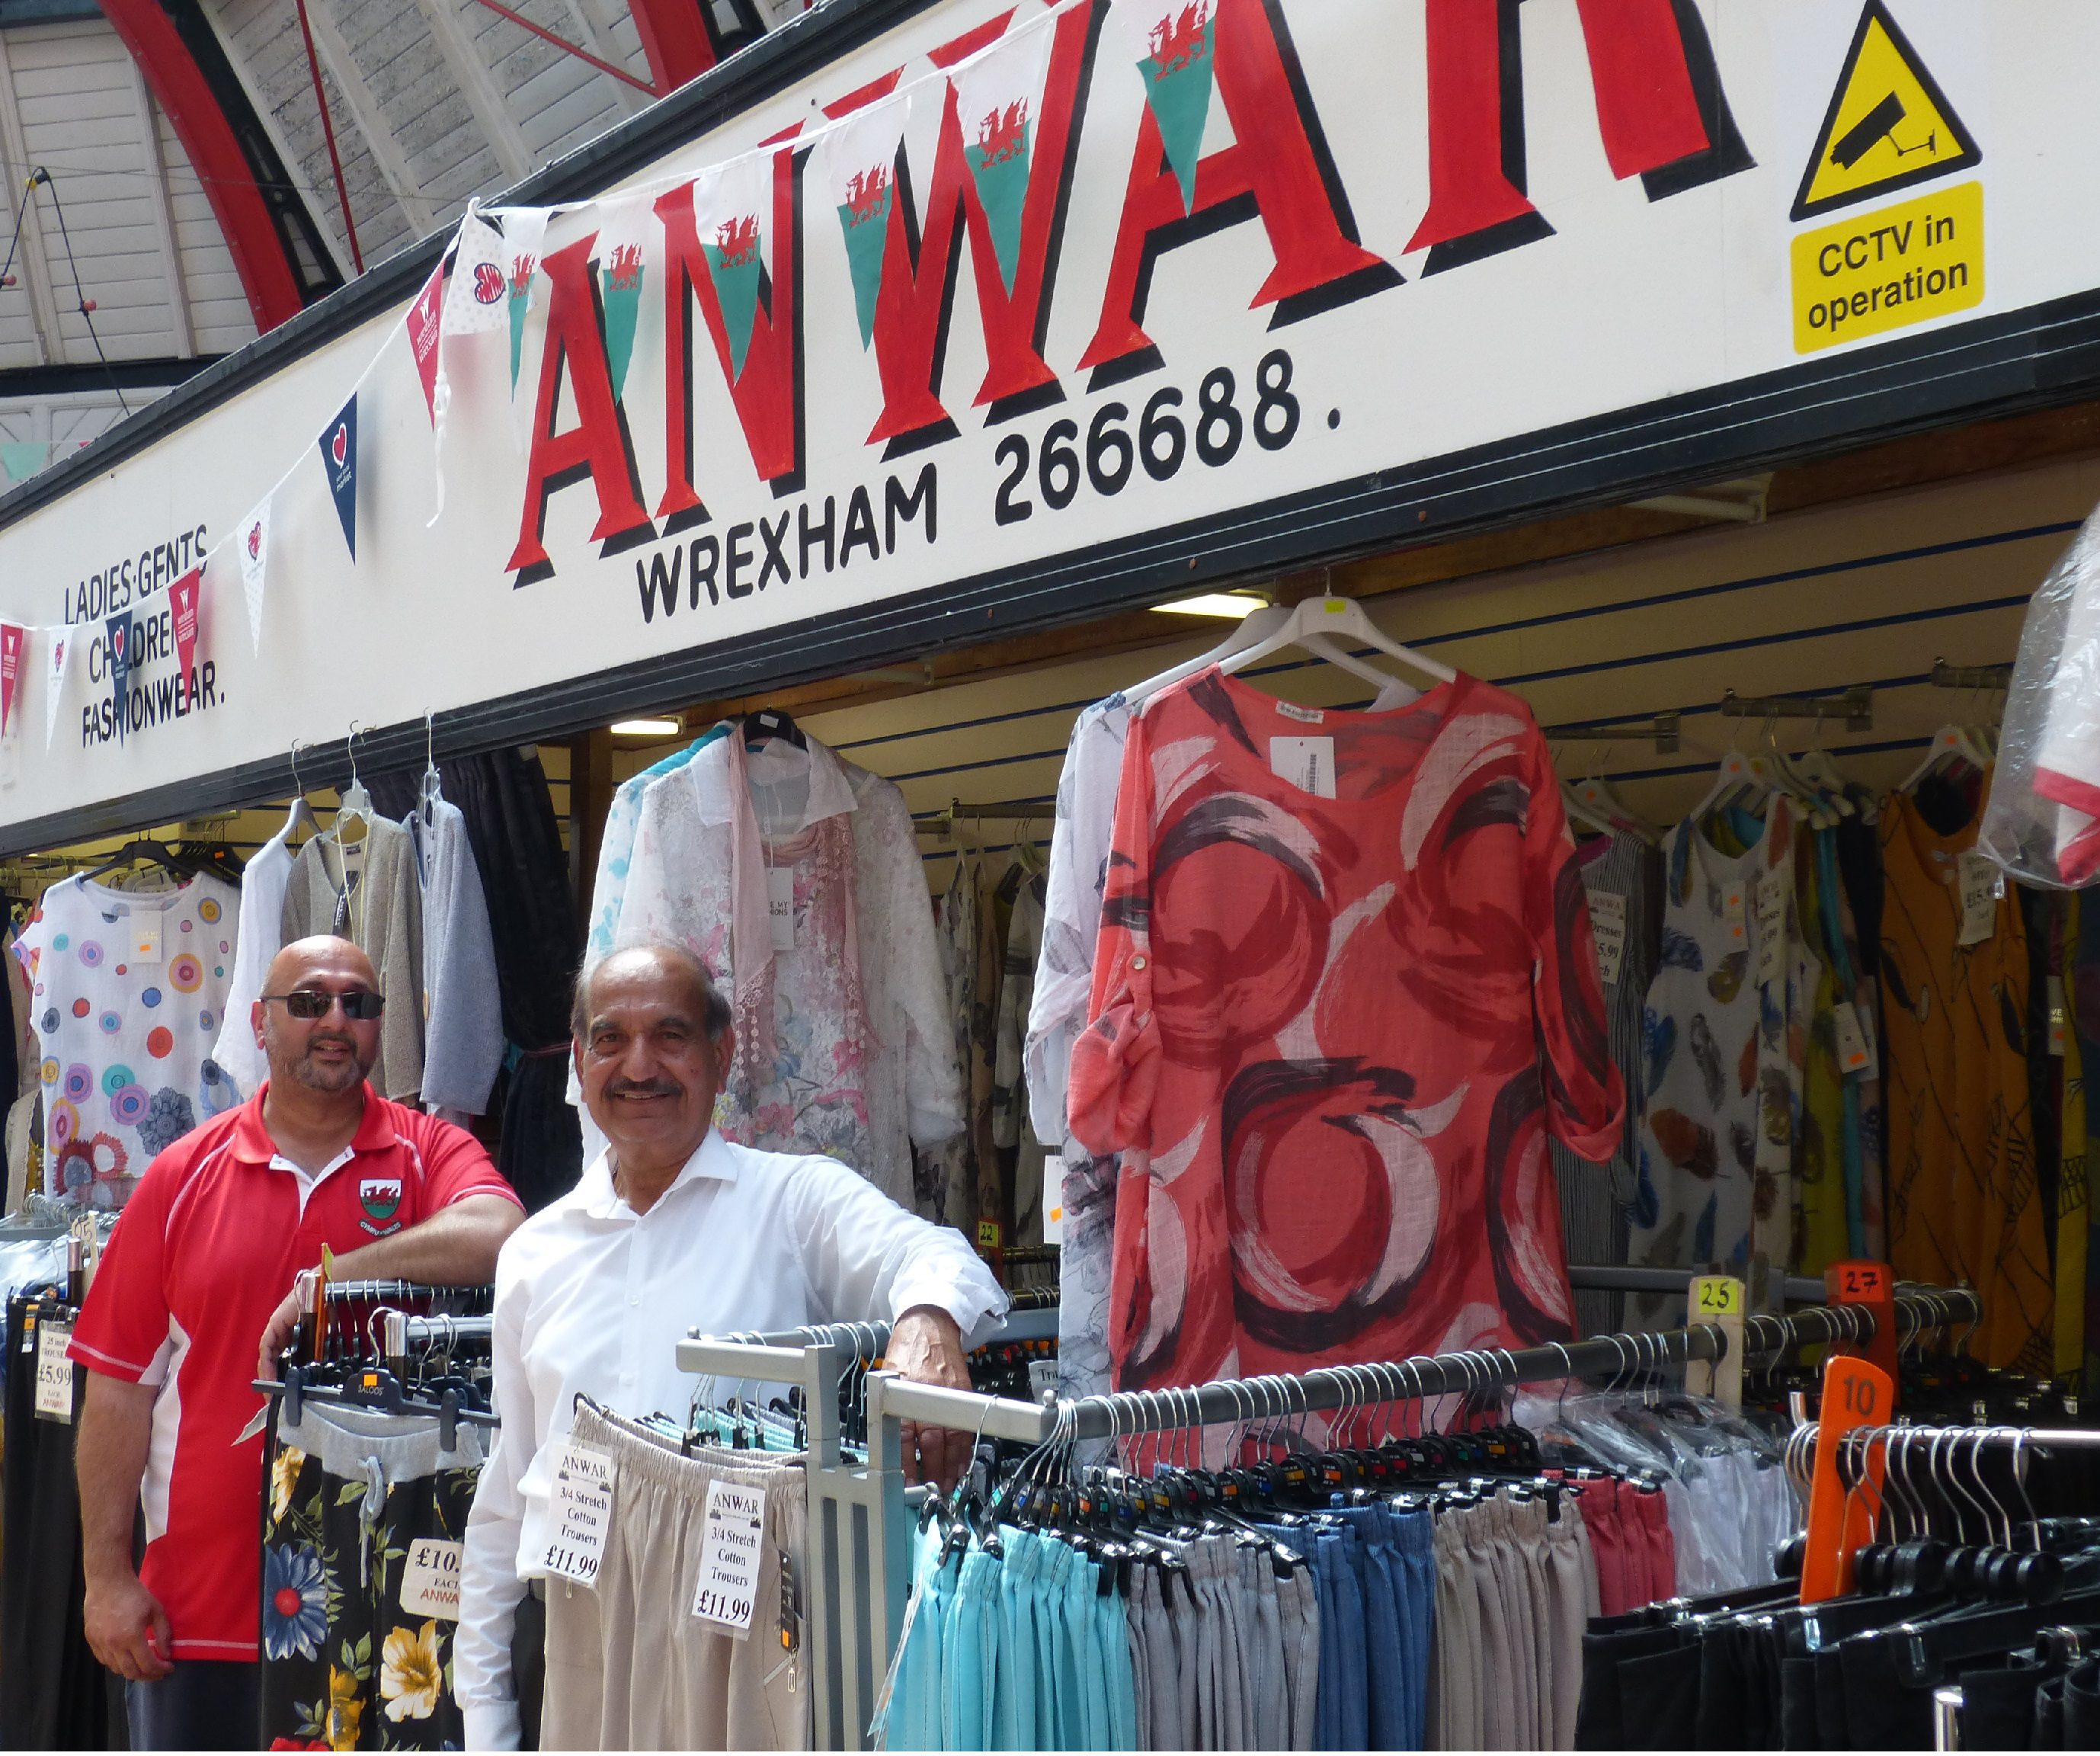 Longstanding market trader marks 50 years of business